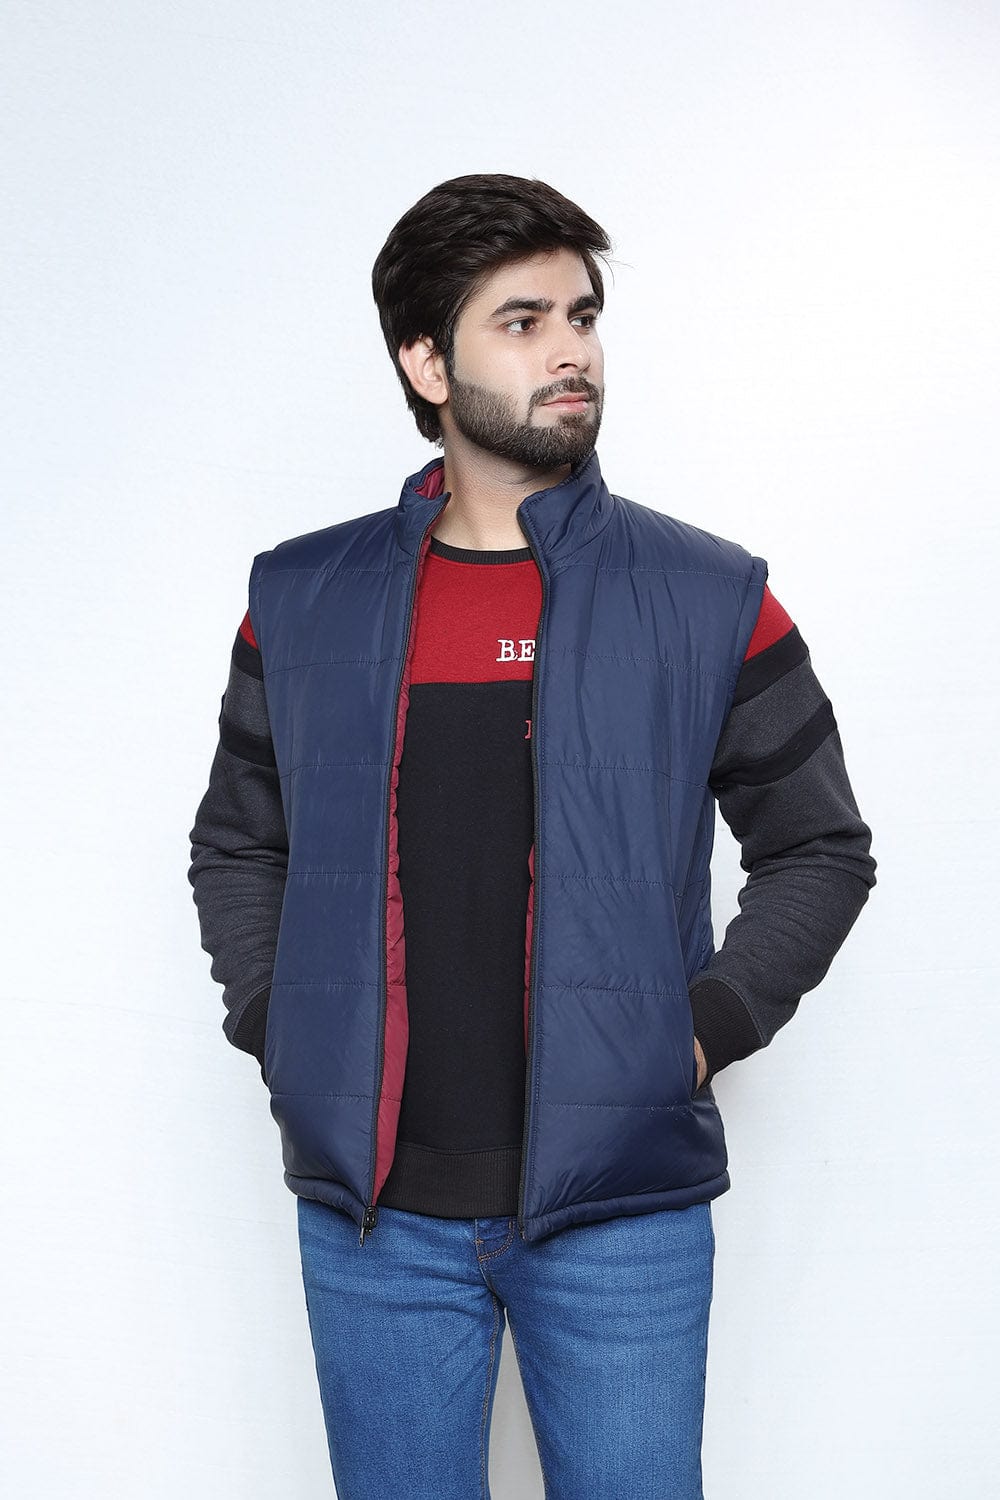 Hope Not Out by Shahid Afridi Men Jacket Puffer Jacket